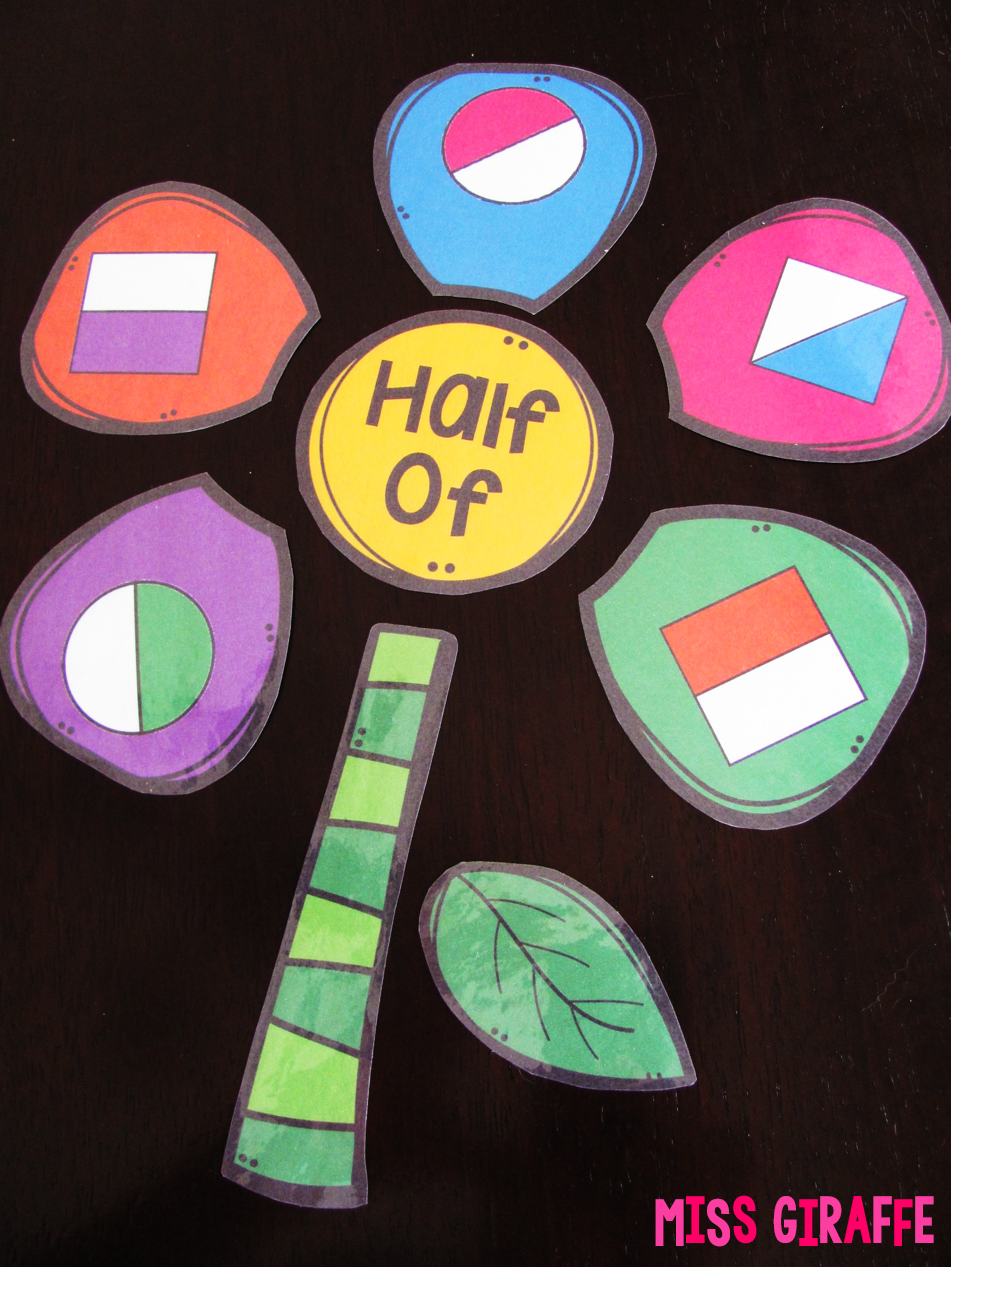 How to make fraction flowers to practice halves and fourths in first grade and thirds and eighths for 2nd grade and a lot of hands on fractions activities that make it so much more engaging!